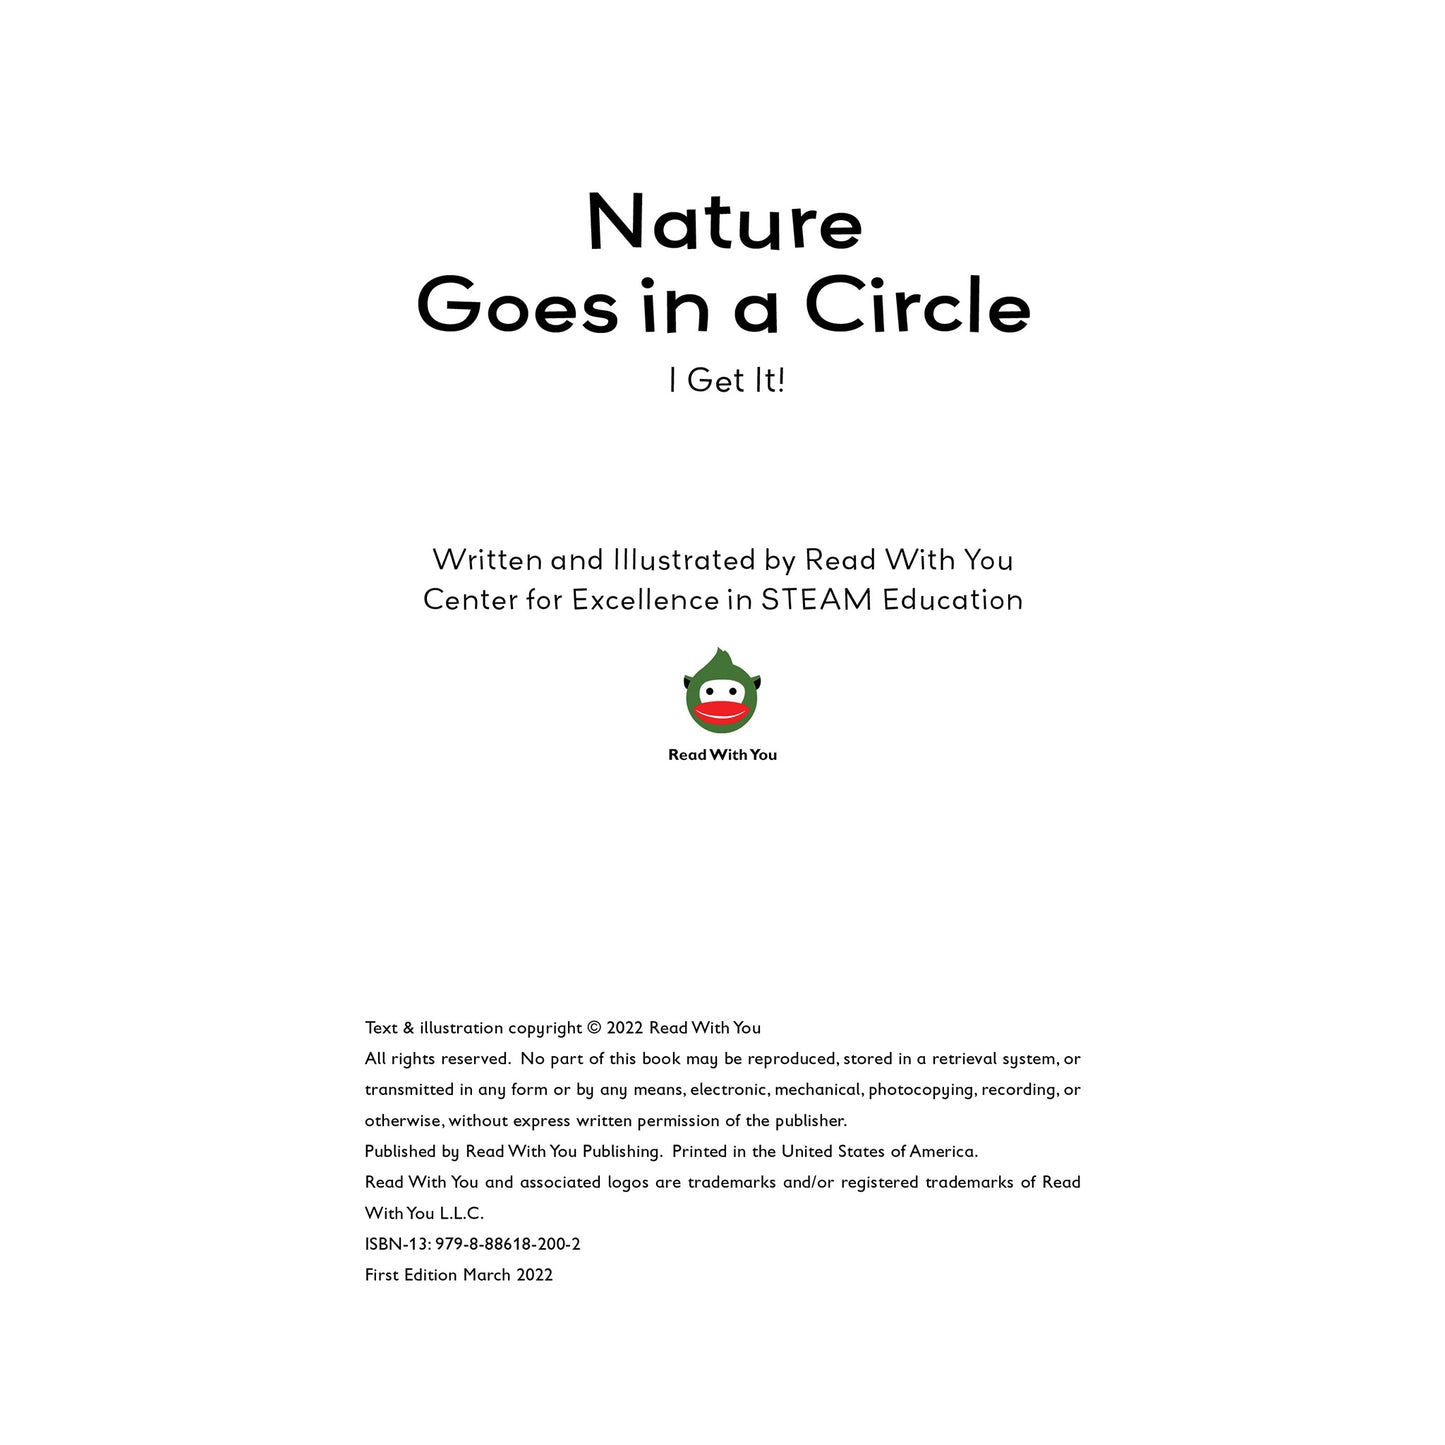 Nature Goes in a Circle